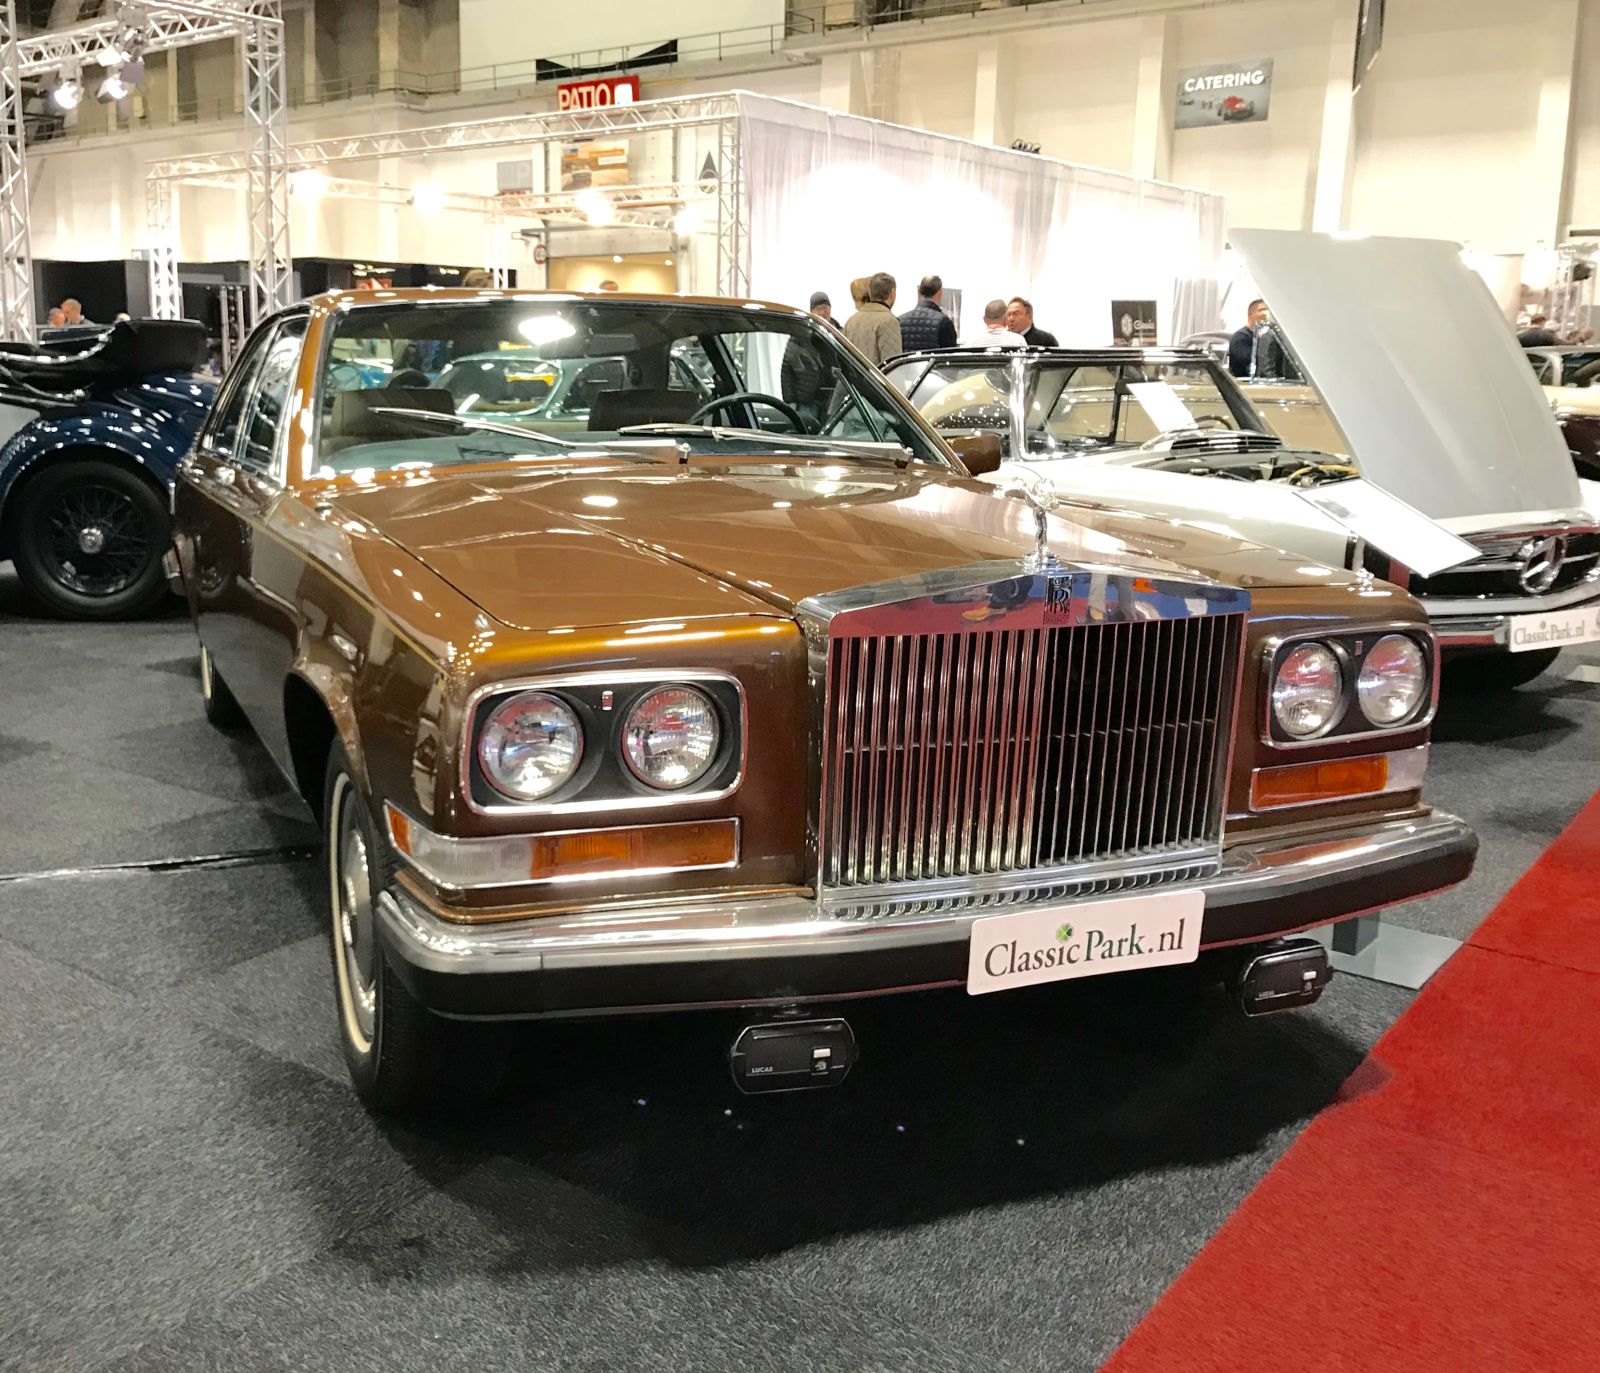 Camargue. An ugly name for an ugly Rolls. This one is gloriously 70&#39;s